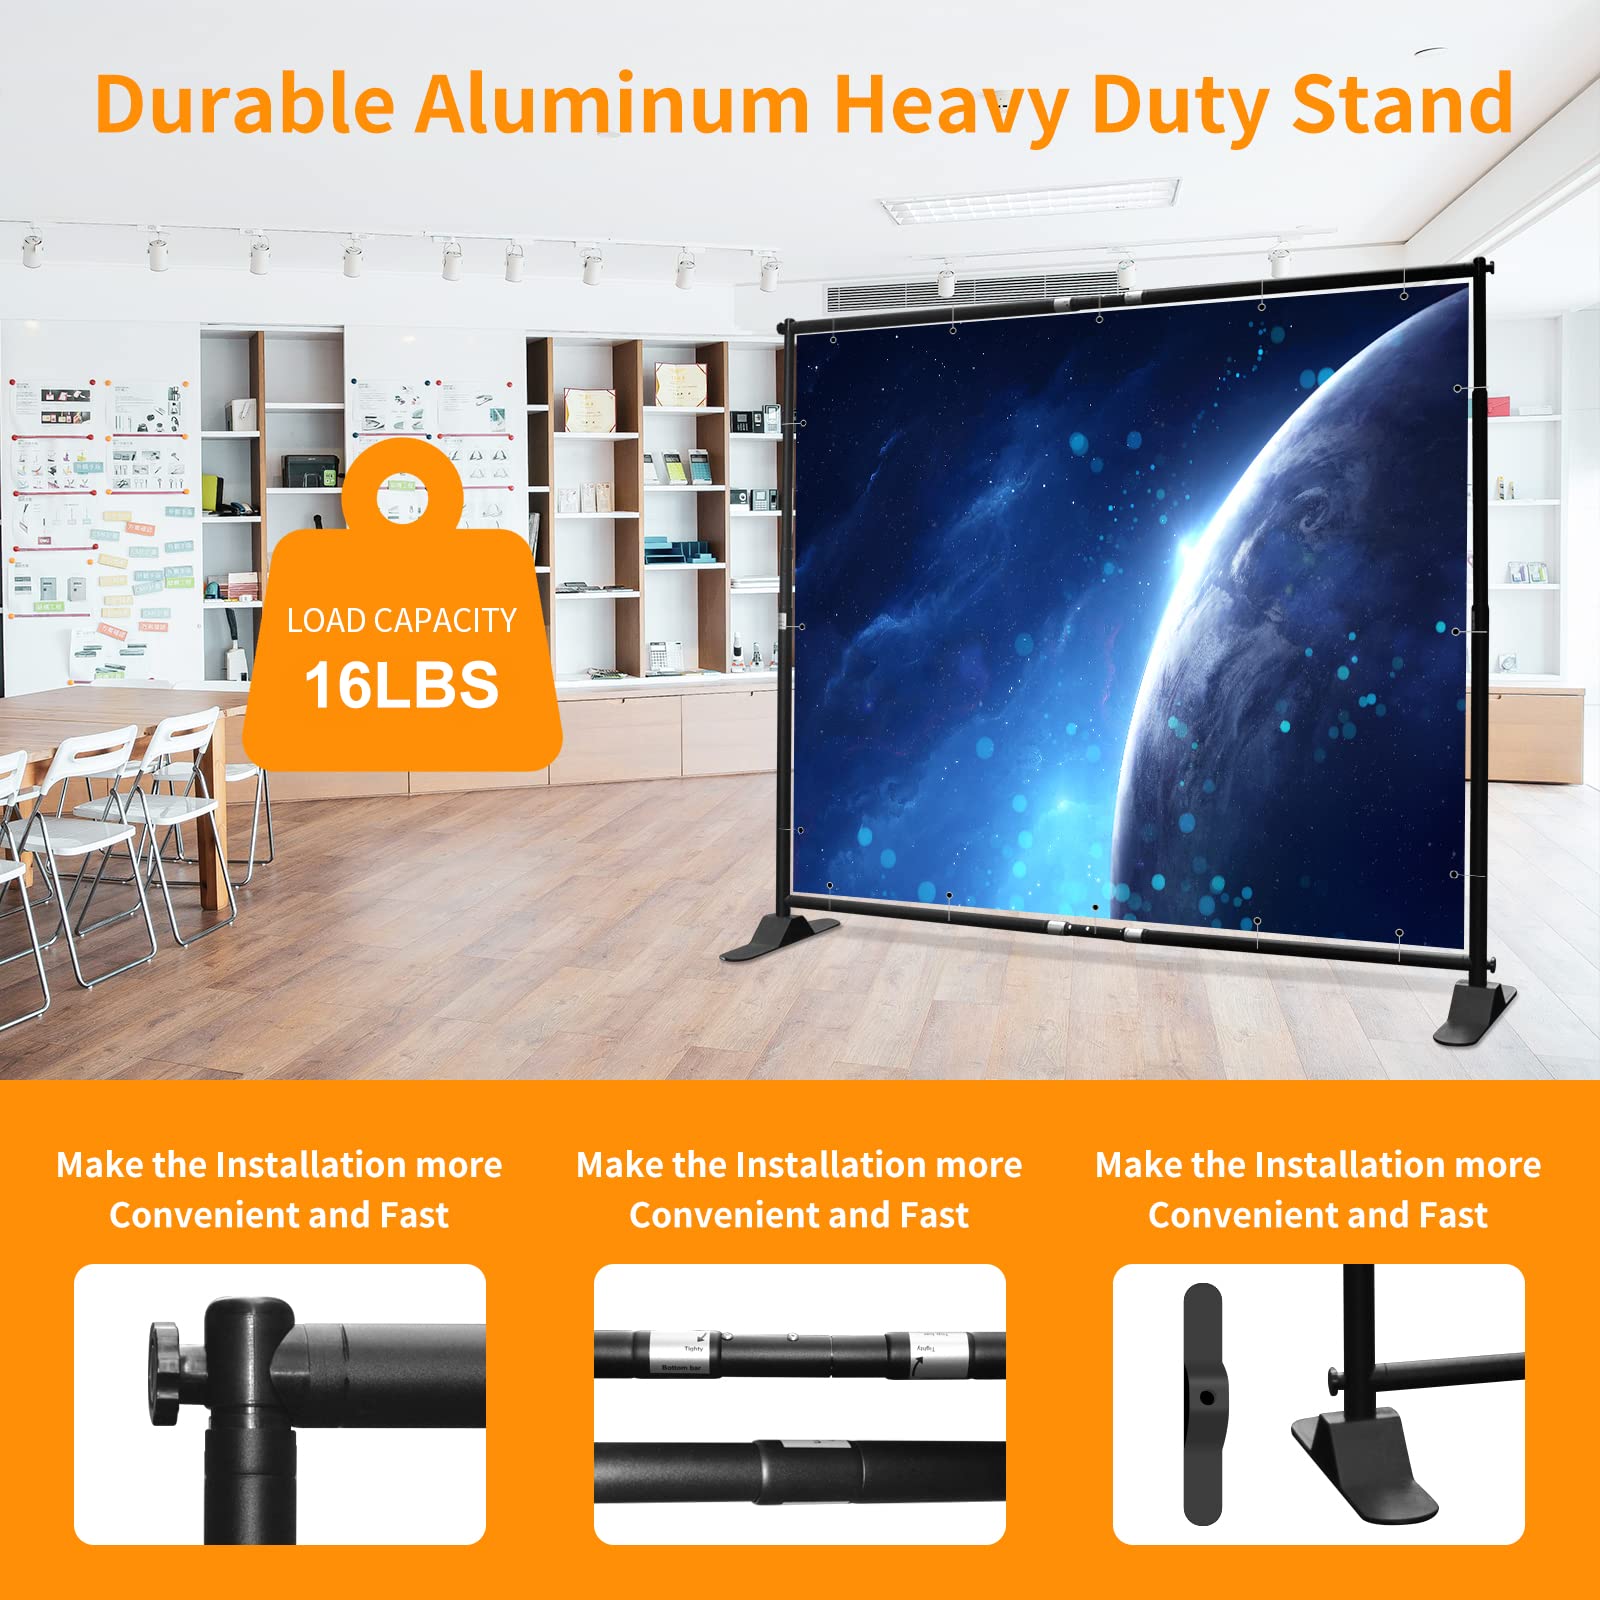 FUDESY 10x8 ft Backdrop Banner Stand, Heavy Duty Adjustable Background Stand Kit with Carrying Bag, Step and Repeat Photography Frame Stand for Trade Show Display Photo Booth Parties